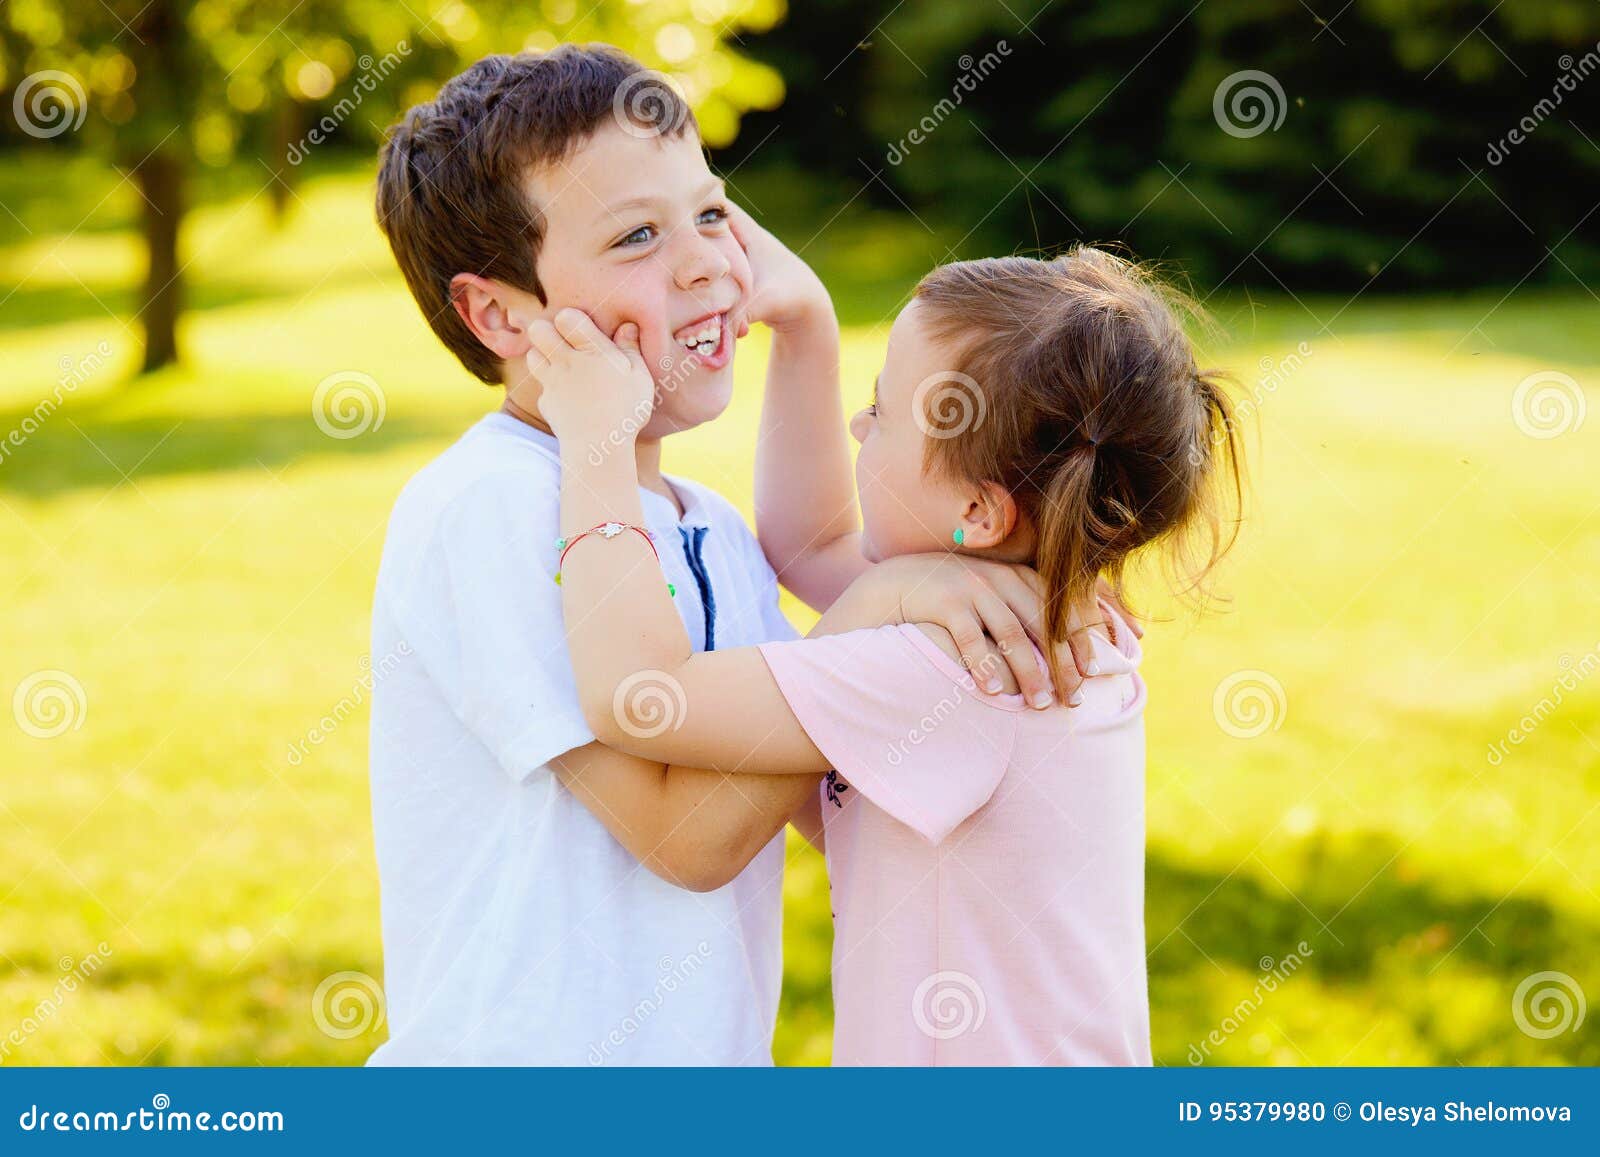 Naughty Little Girl Pinching Cheeks Of Her Brother Stock Photo Image